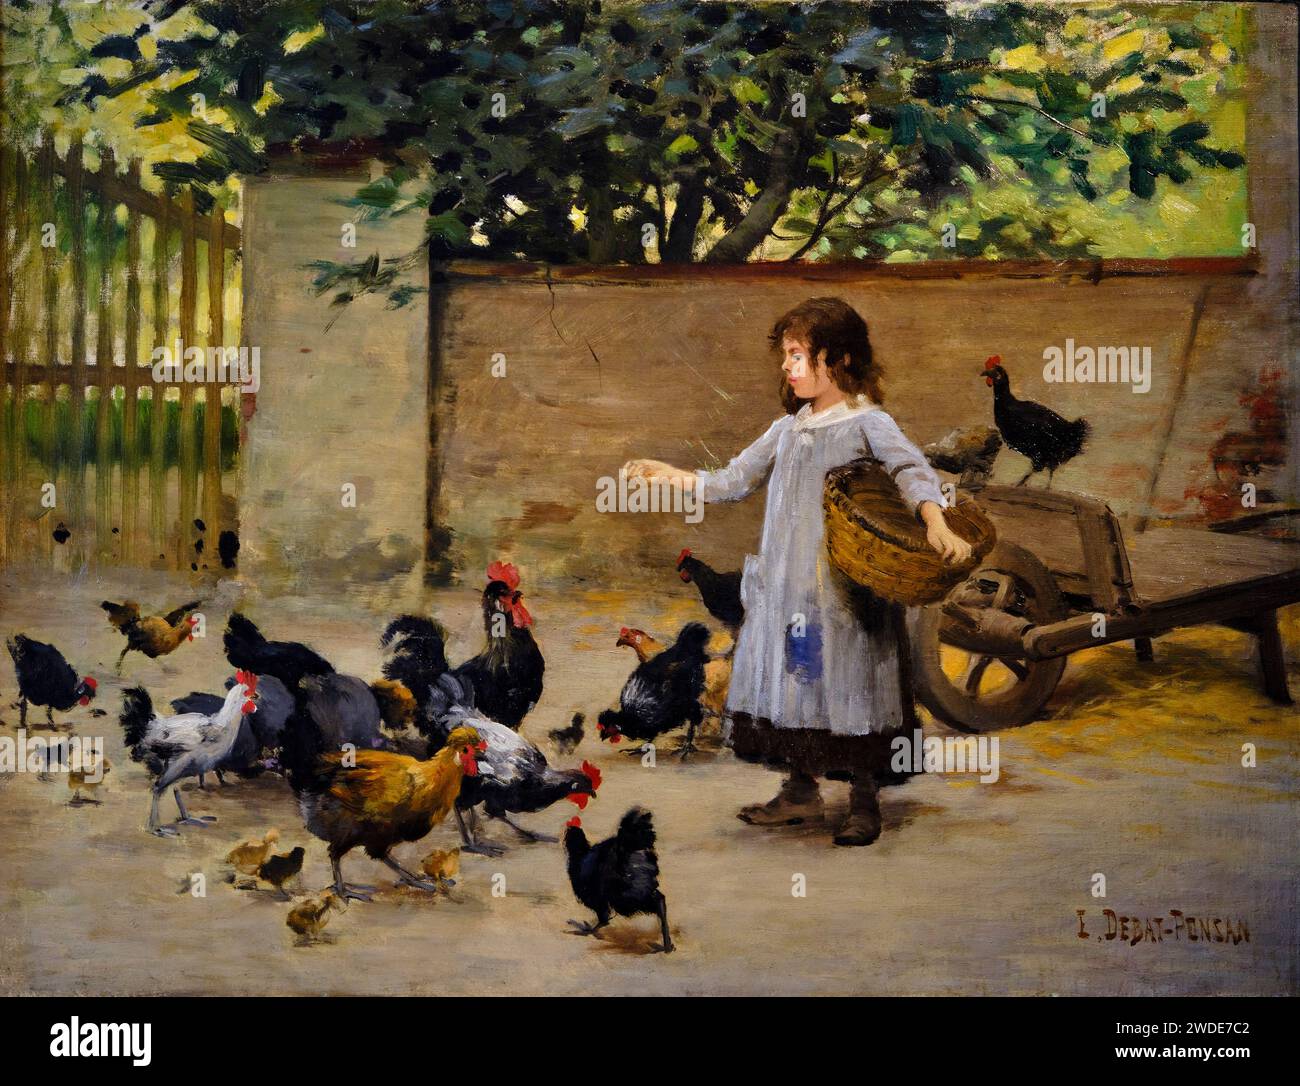 France, Indre et Loire (37), Loire Valley, Tours, Palais des Archbishops and Museum of Fine Arts, little girl feeding chickens, Edouard Debat-Ponsan, Stock Photo